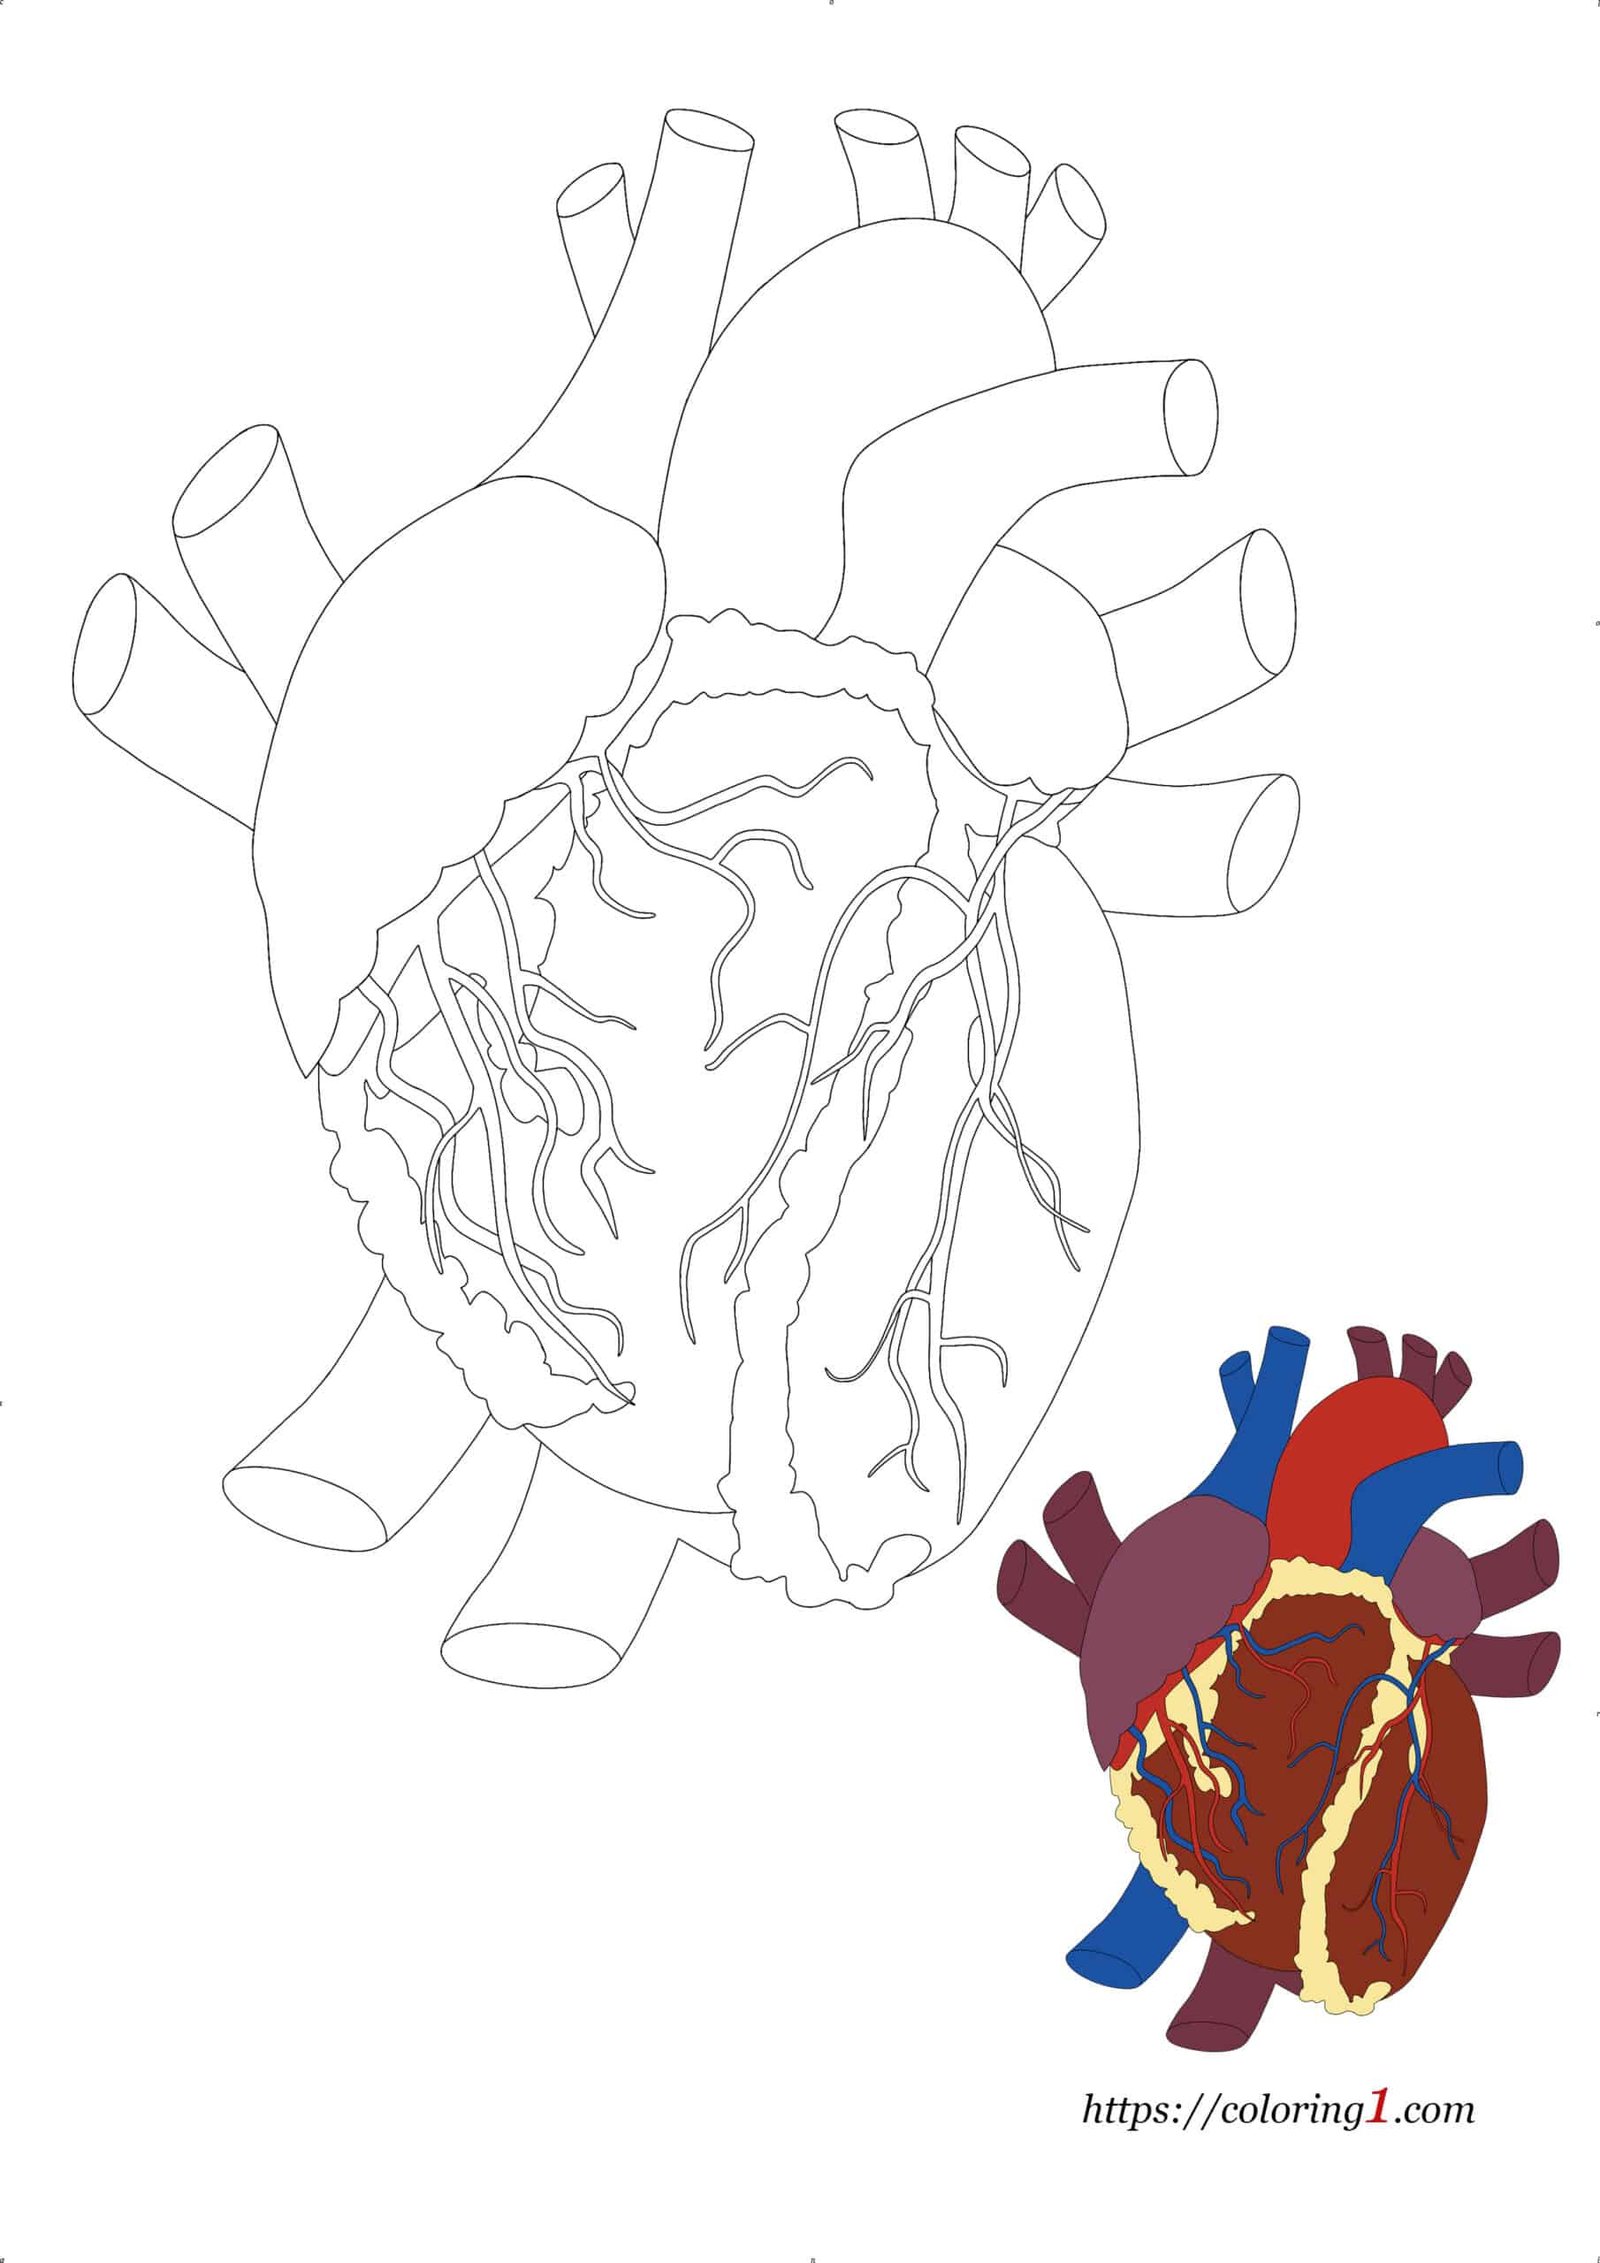 Heart Anatomy Coloring Page for adults